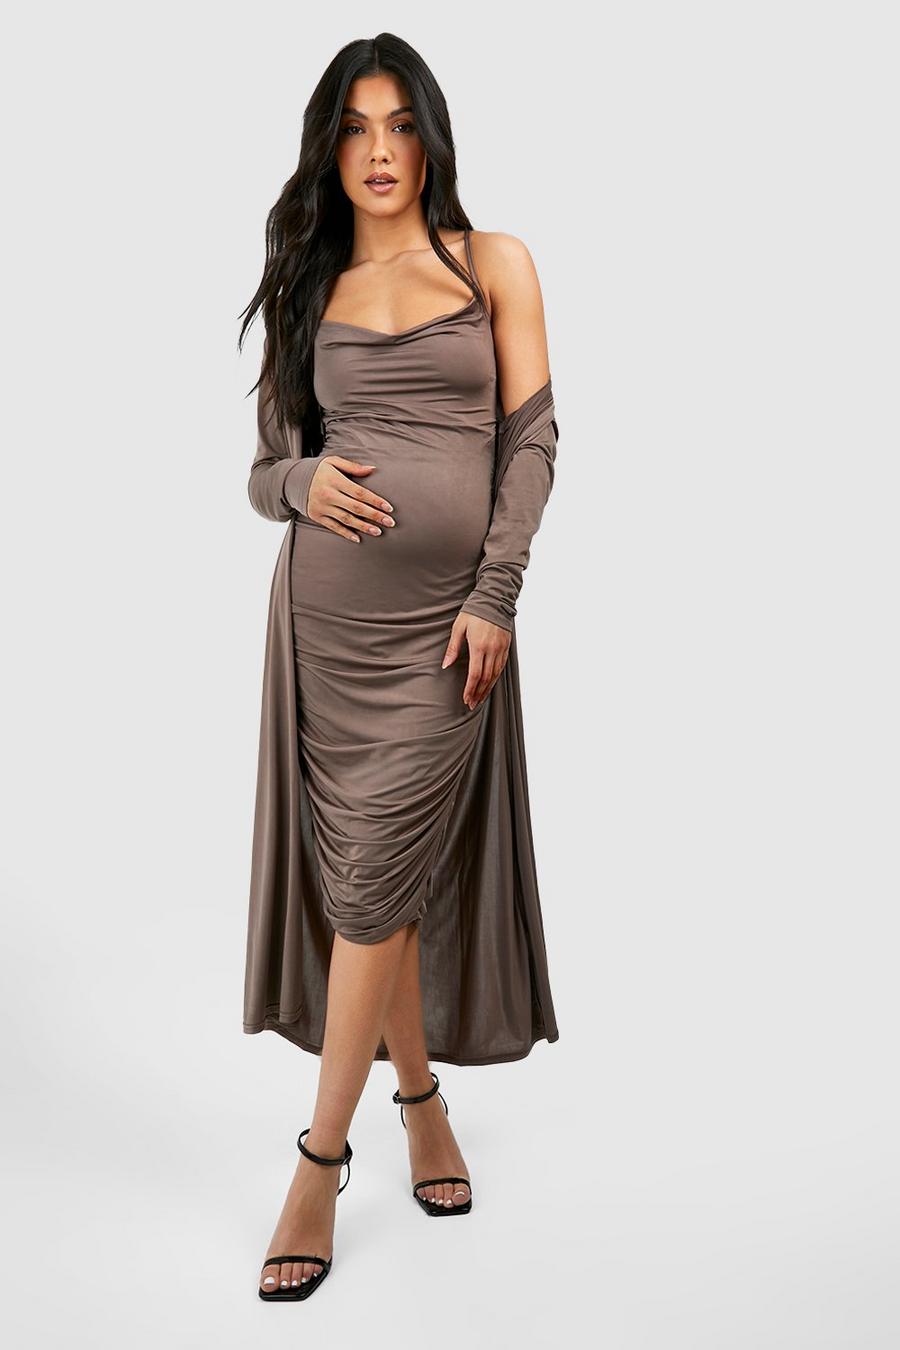 Maternity Clothes | Maternity Outfits & Pregnancy Clothing | boohoo UK